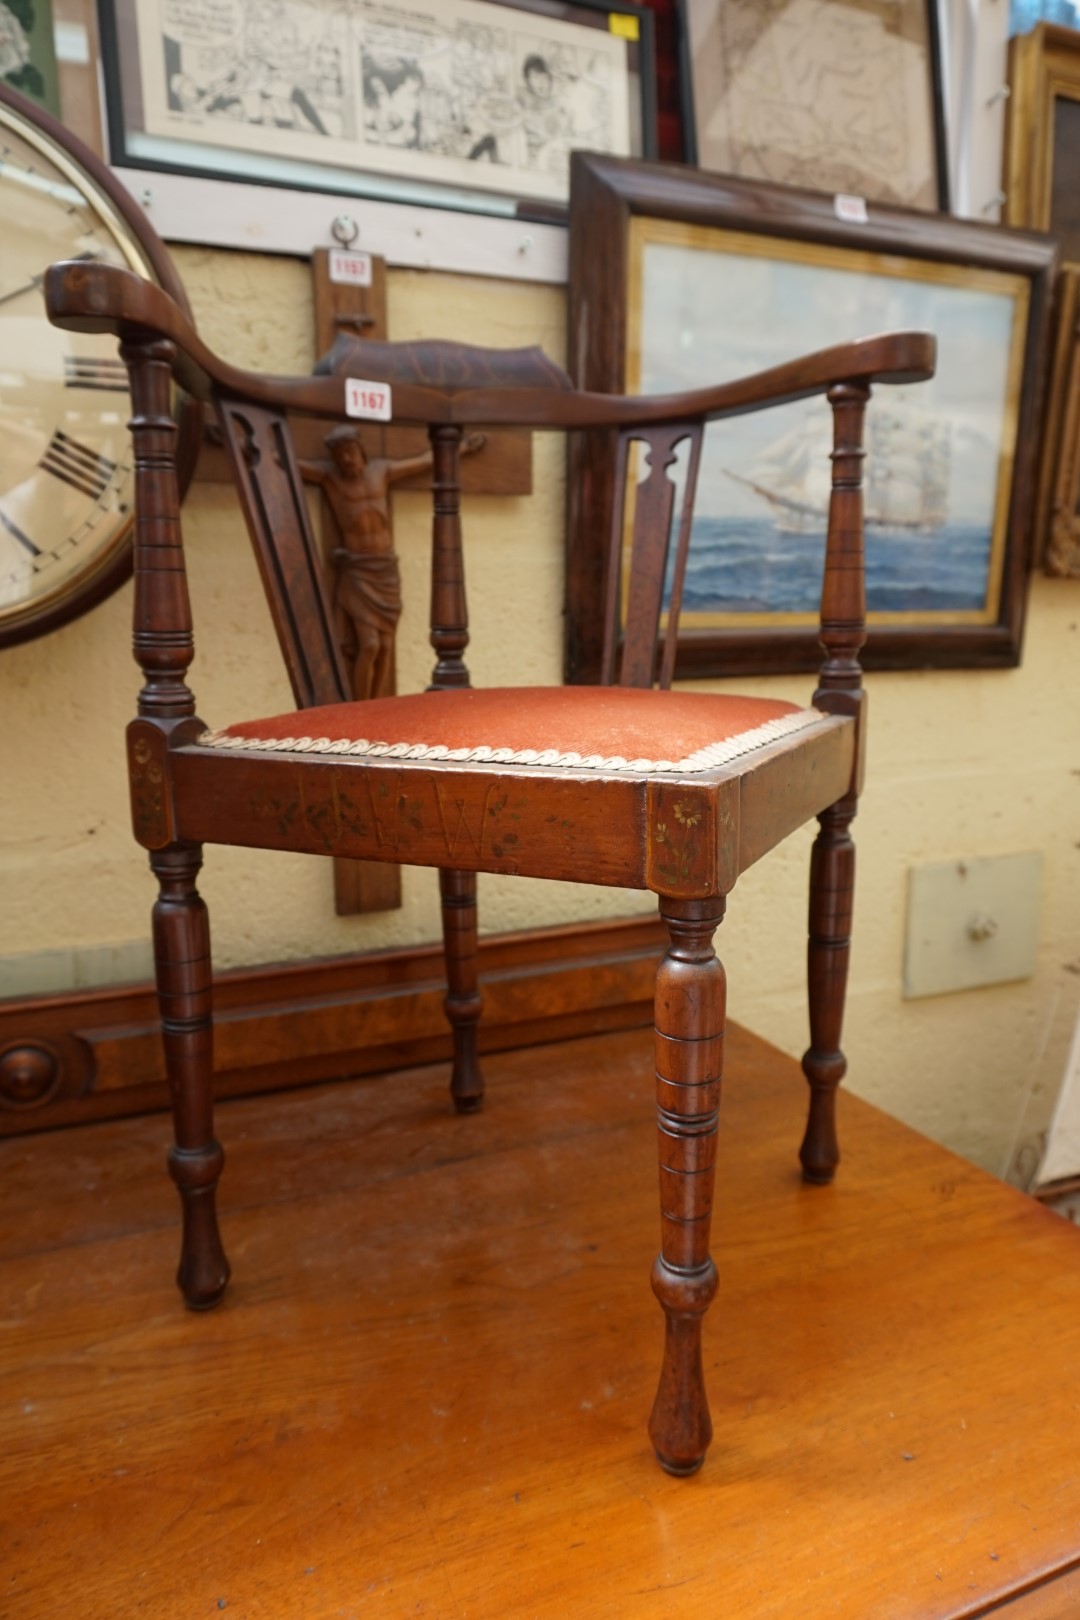 A circa 1900 mahogany and painted child's corner chair, decorated with flowers and letters from - Image 3 of 3